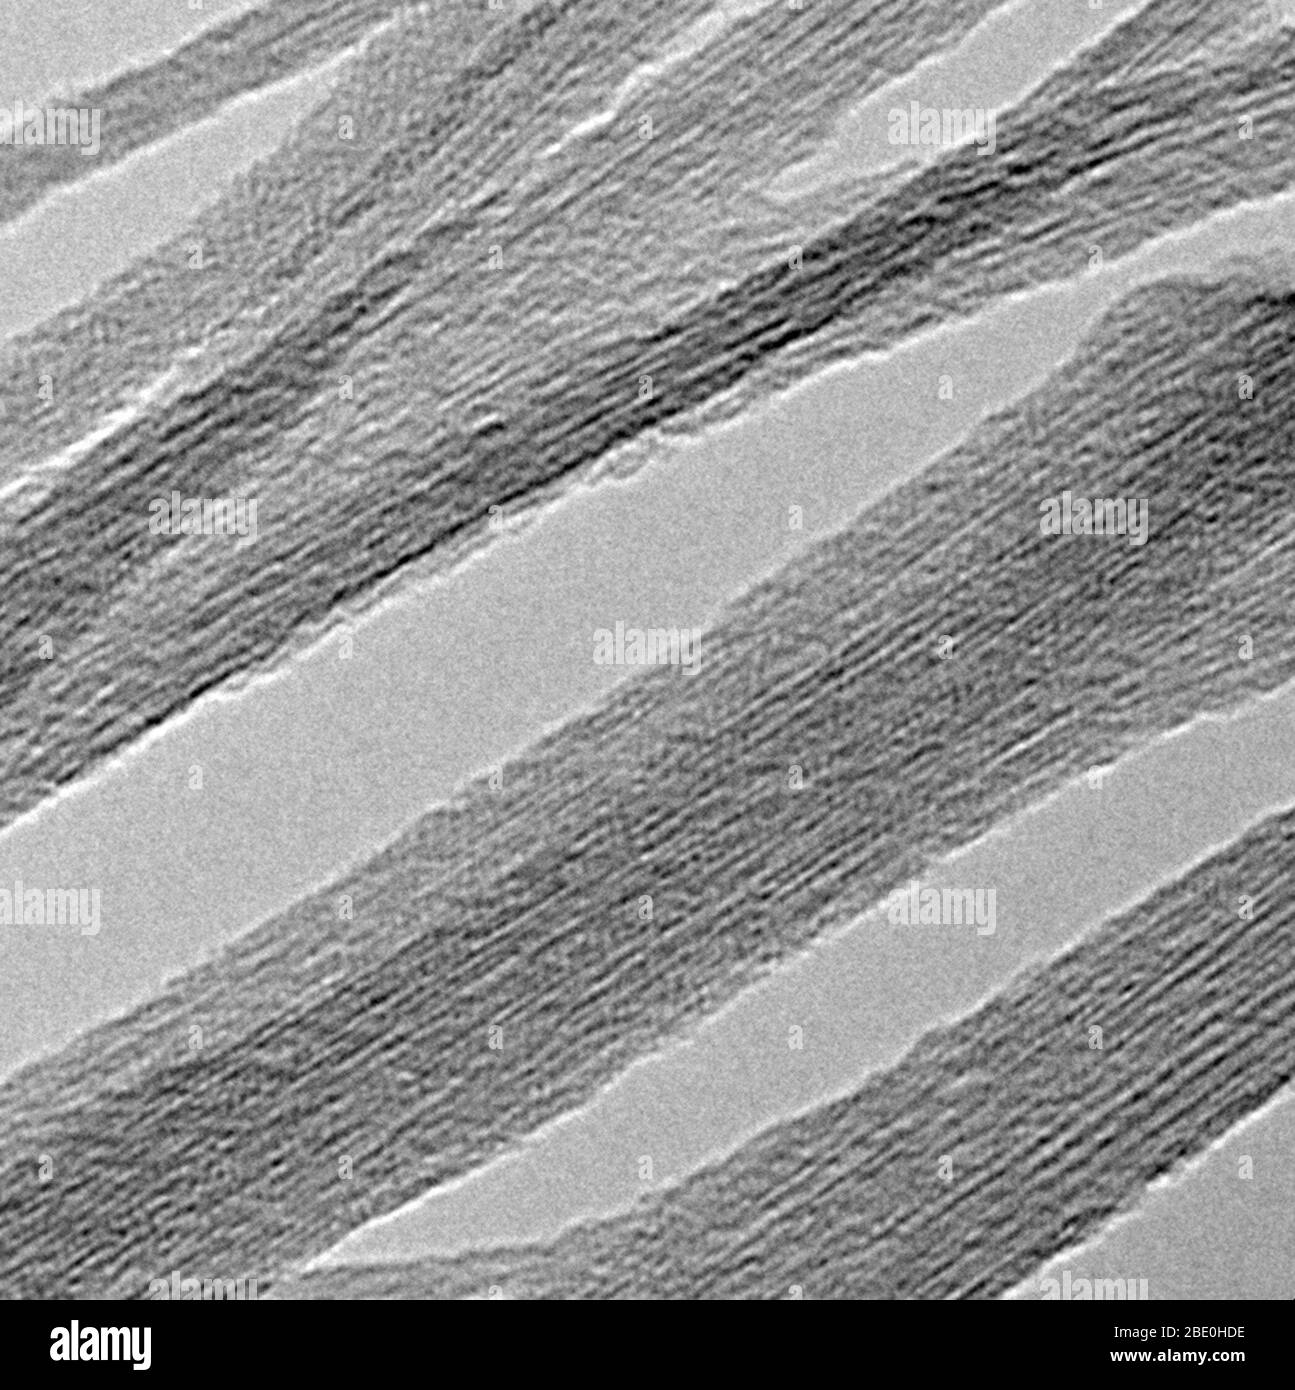 Transmission electron micrograph (TEM) of single-walled carbon nanotubes. Magnification unknown. Stock Photo